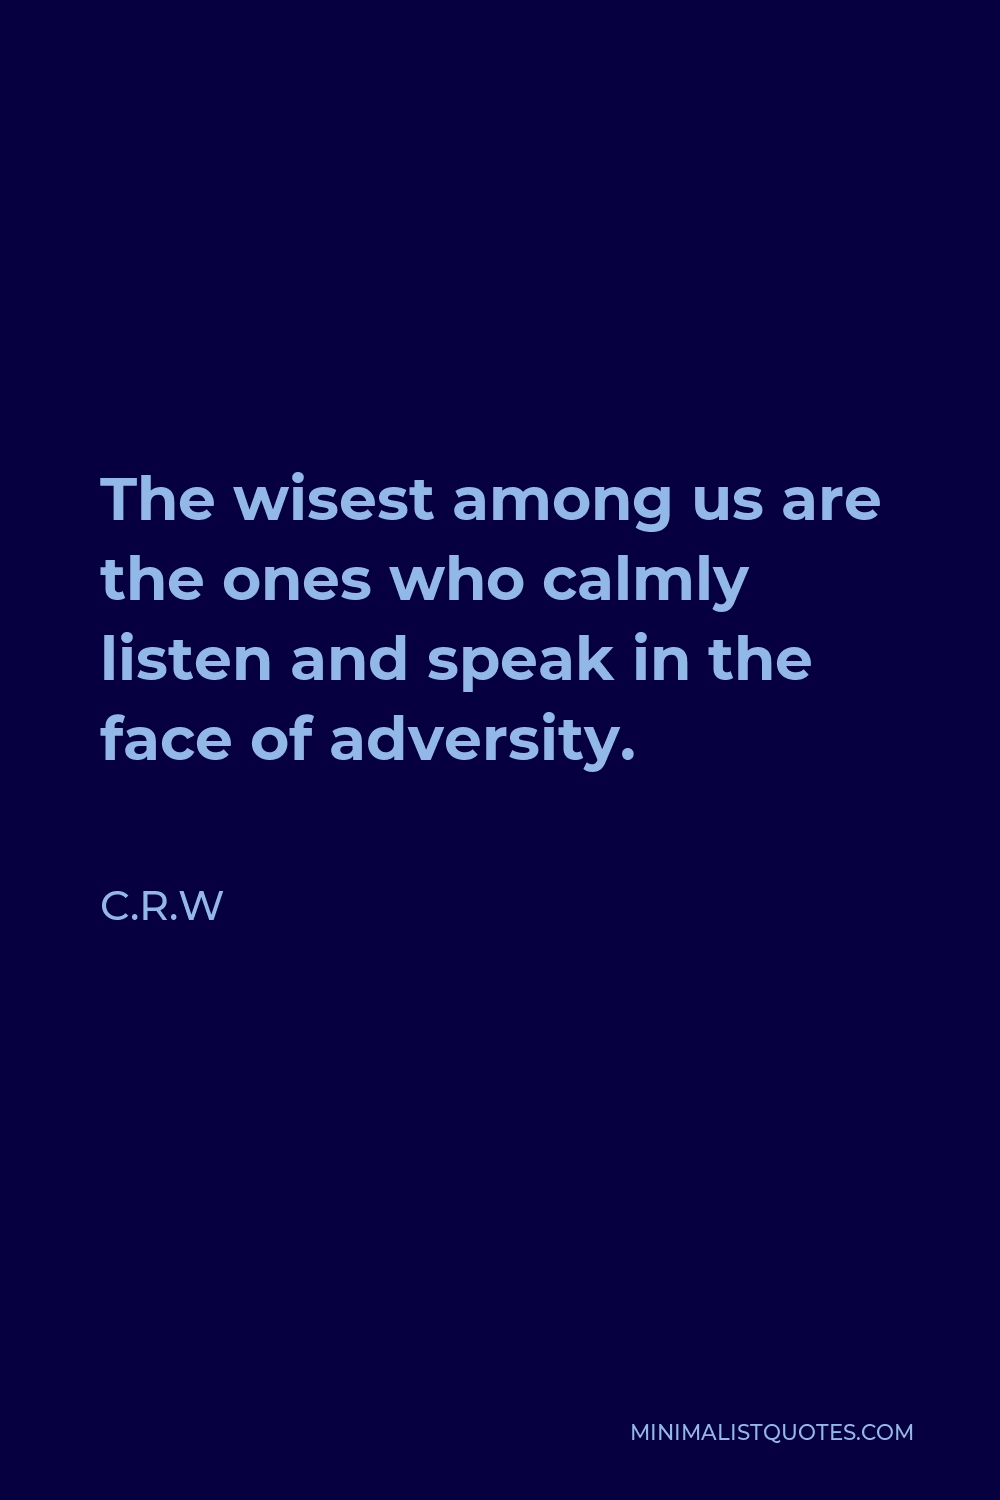 C.R.W Quote - The wisest among us are the ones who calmly listen and speak in the face of adversity.